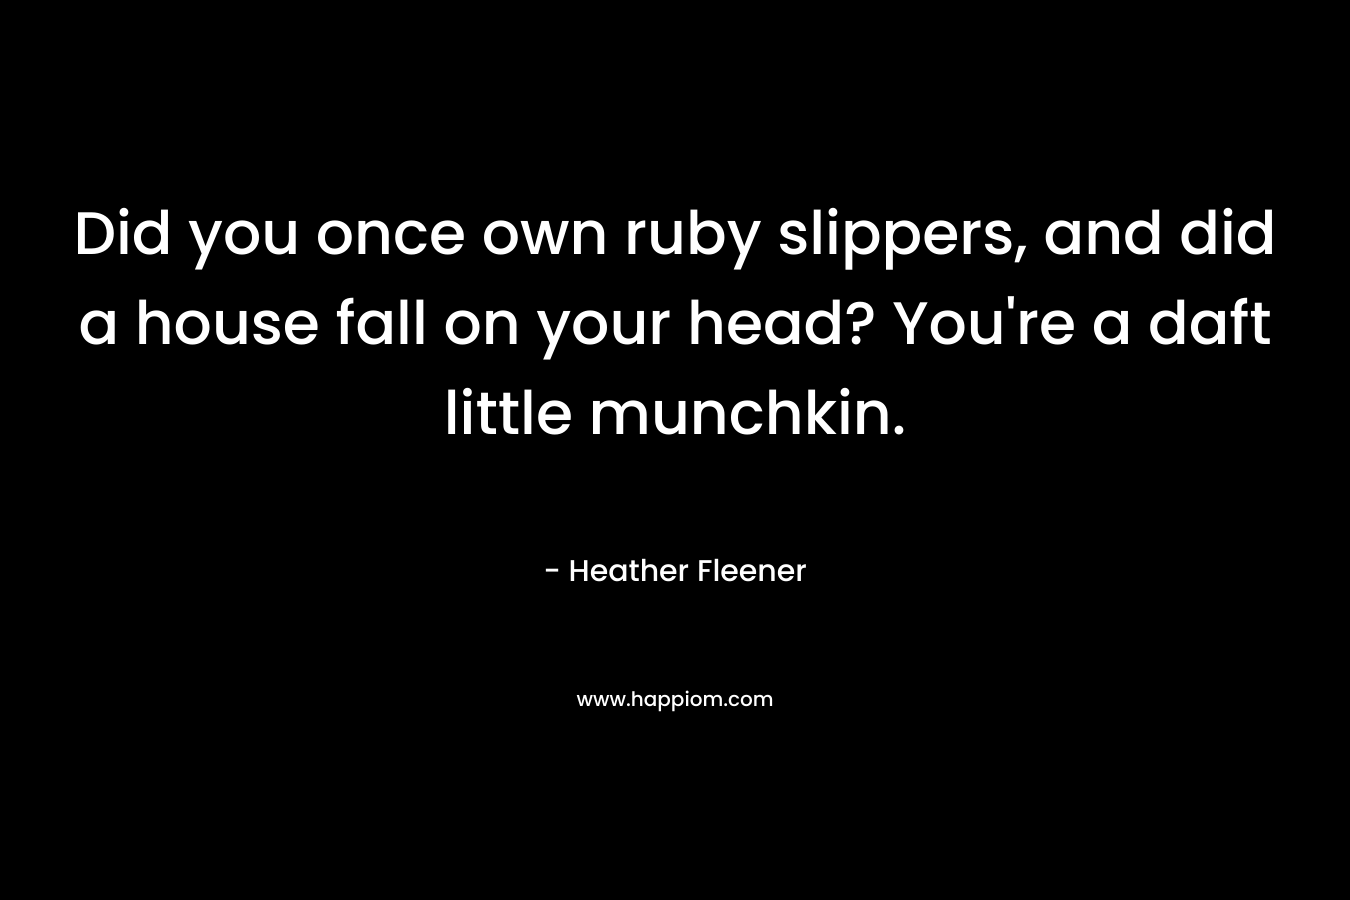 Did you once own ruby slippers, and did a house fall on your head? You're a daft little munchkin.